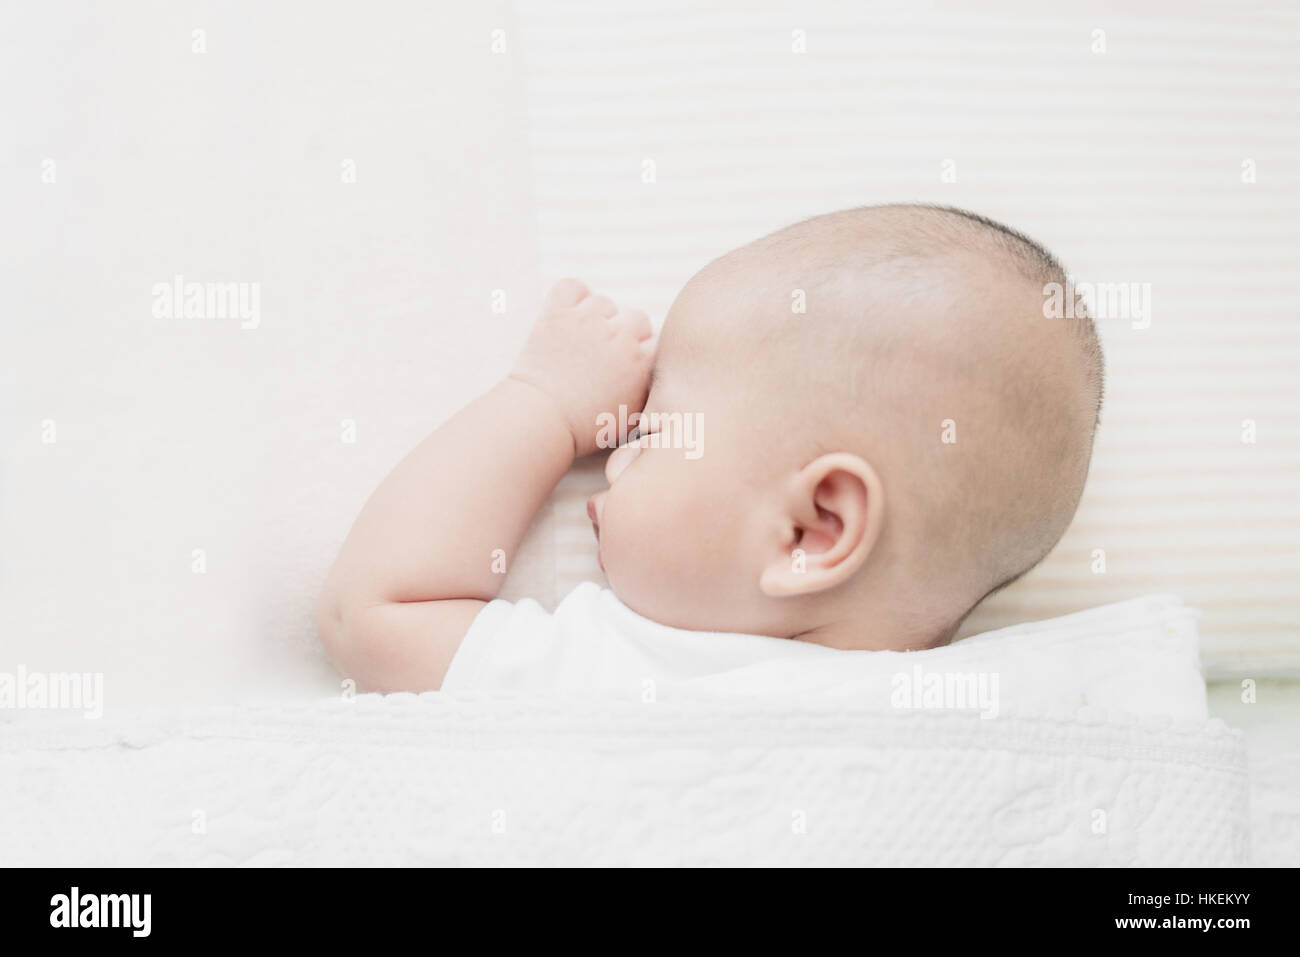 Asian little infant baby boy sleeping on soft white blanket in bed. Stock Photo